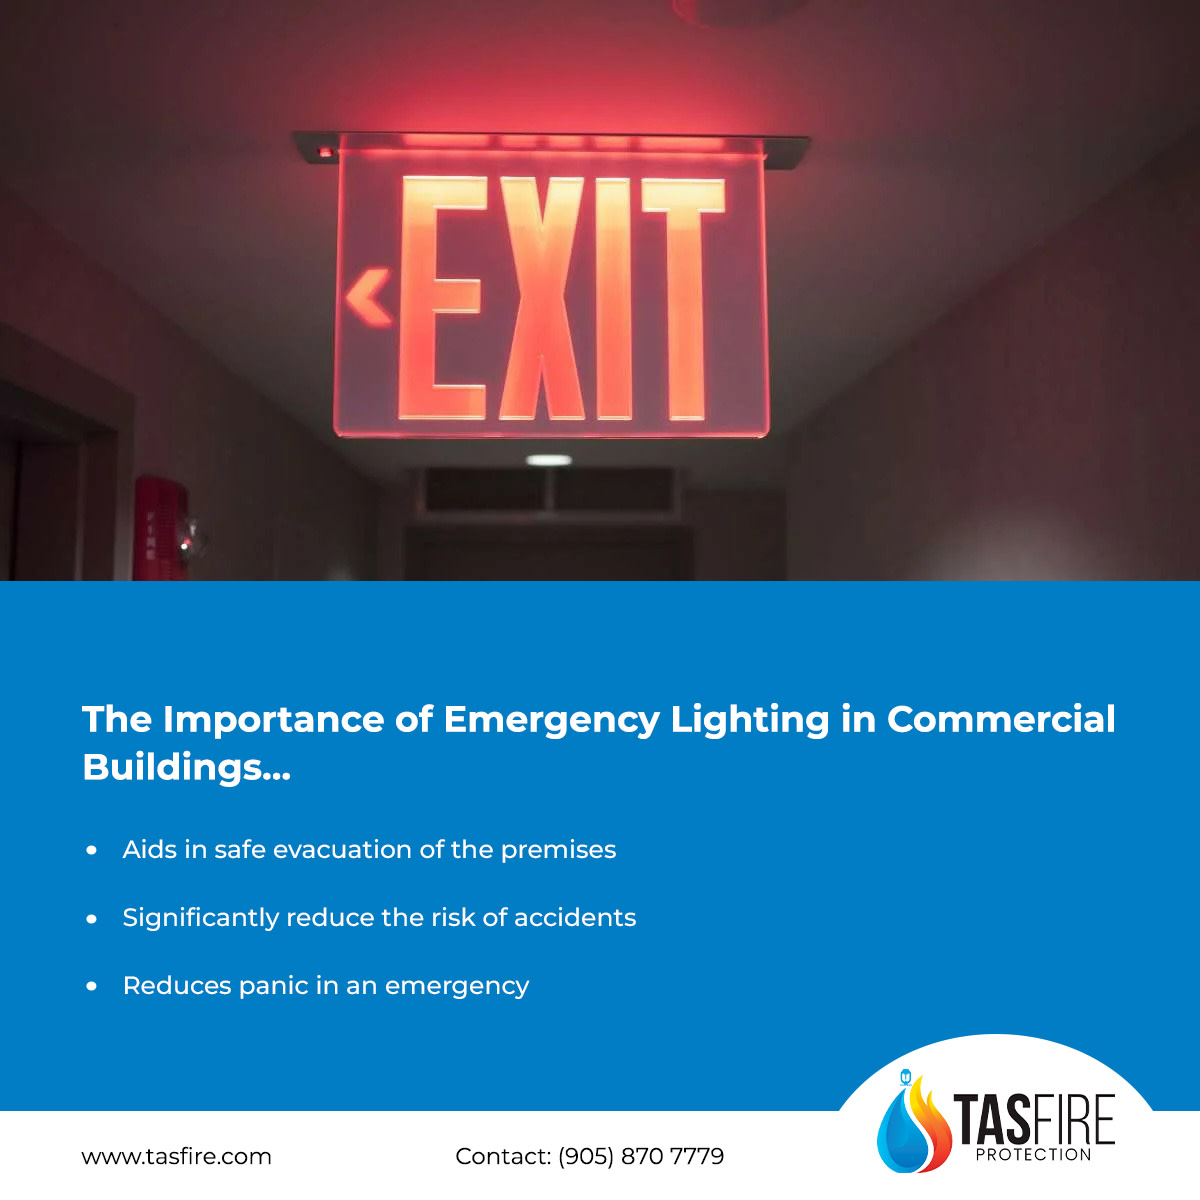 Tas Fire Protection... - The Importance of Emergency Lighting in Commercial Buildings…
LEARN MORE... tasfire.com/the-importance…
#lighting #emergencylighting #securitylighting #safety #securitysystems #weston
#florida #southflorida #fortlauderdale